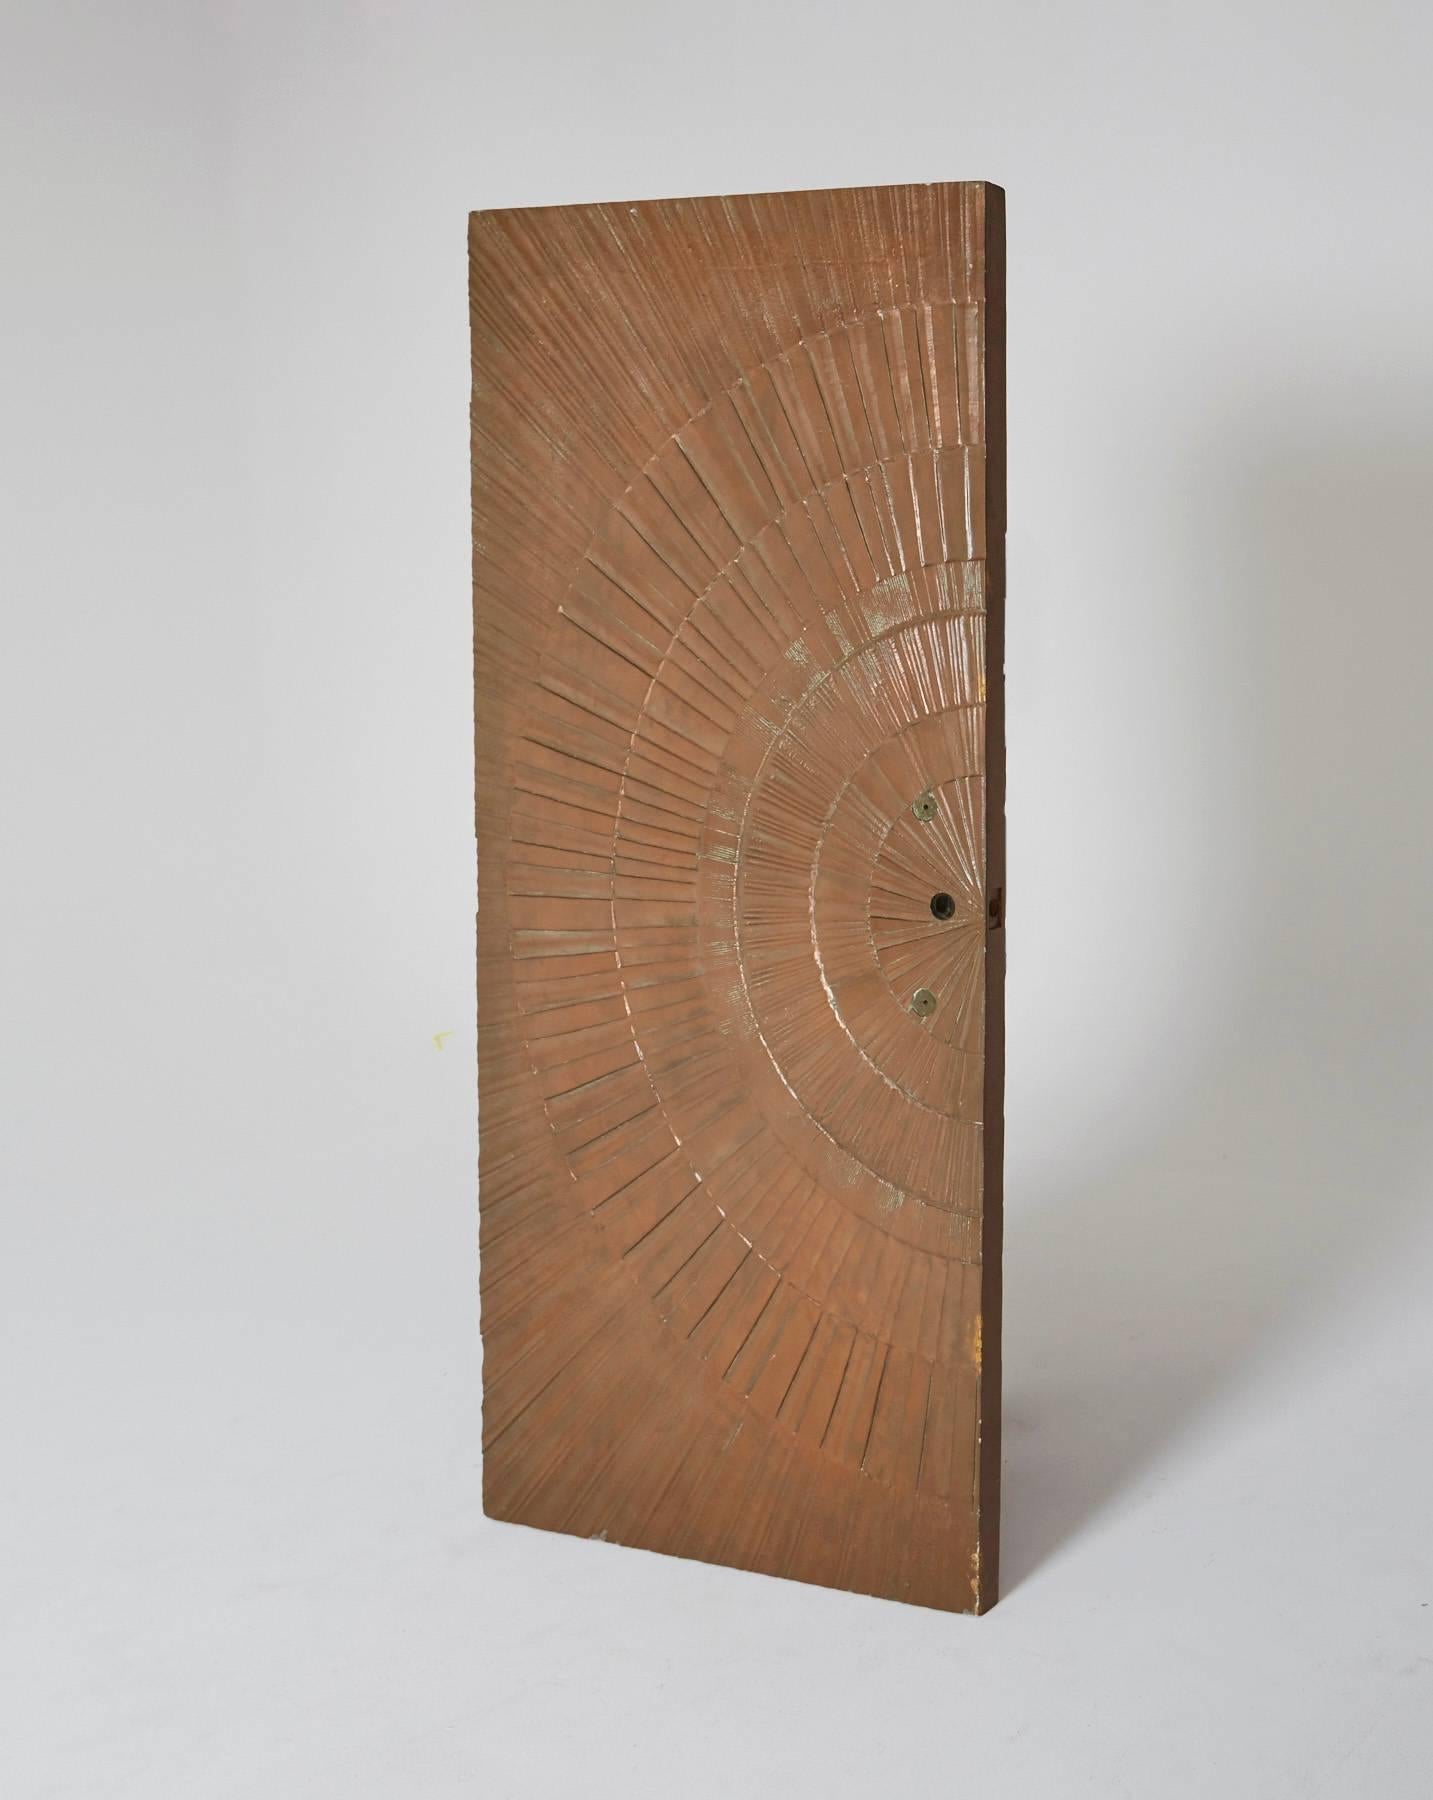 A wildly amazing Mid-Century Modern door by Sherrill Broudy for forms and surfaces, circa 1960, a grandiose bonded and poured bronze door in an abstract Sunburst design. Monumental and stunning, this item comes from deadstock and has never been